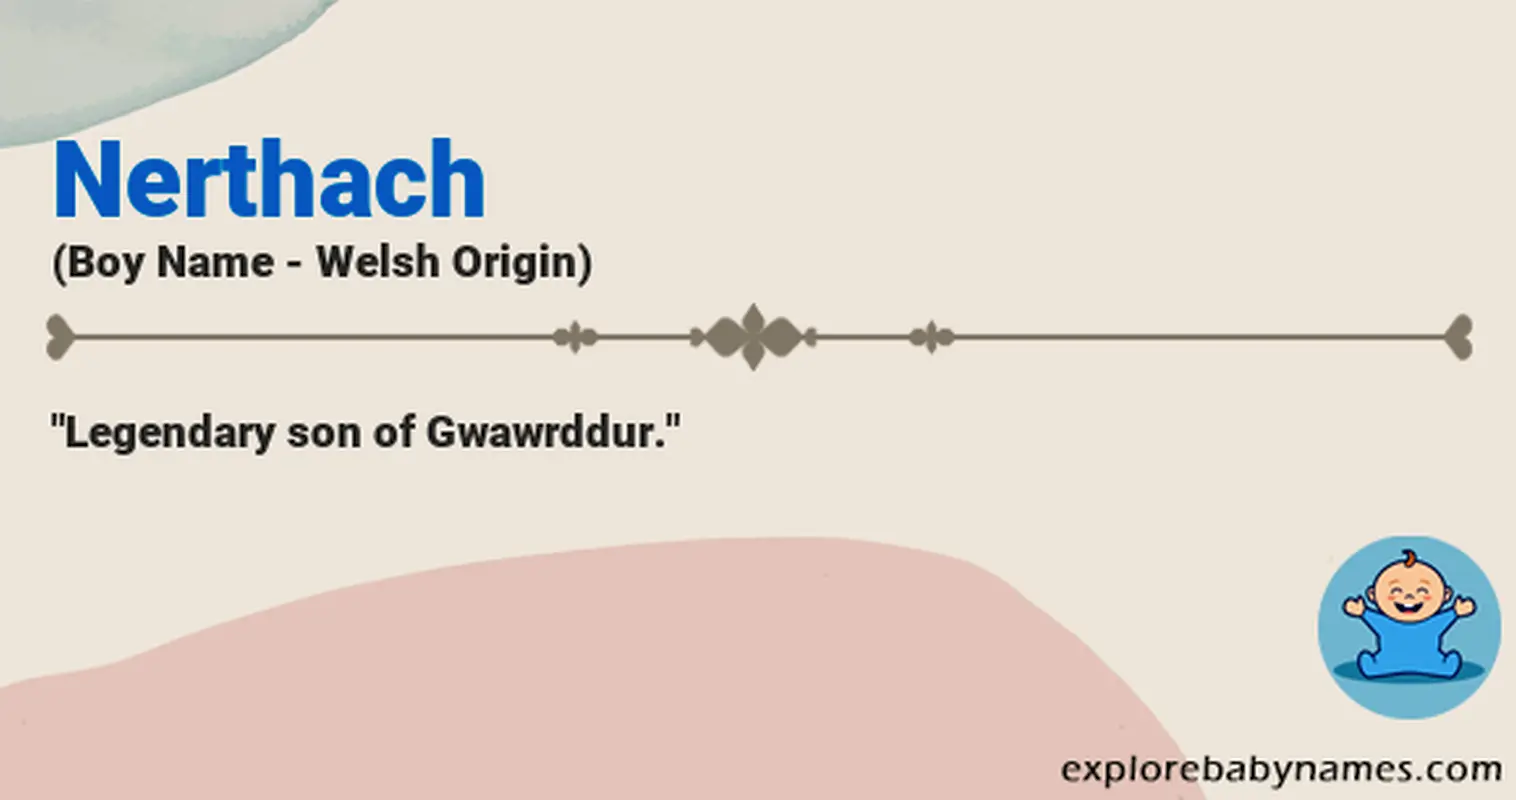 Meaning of Nerthach